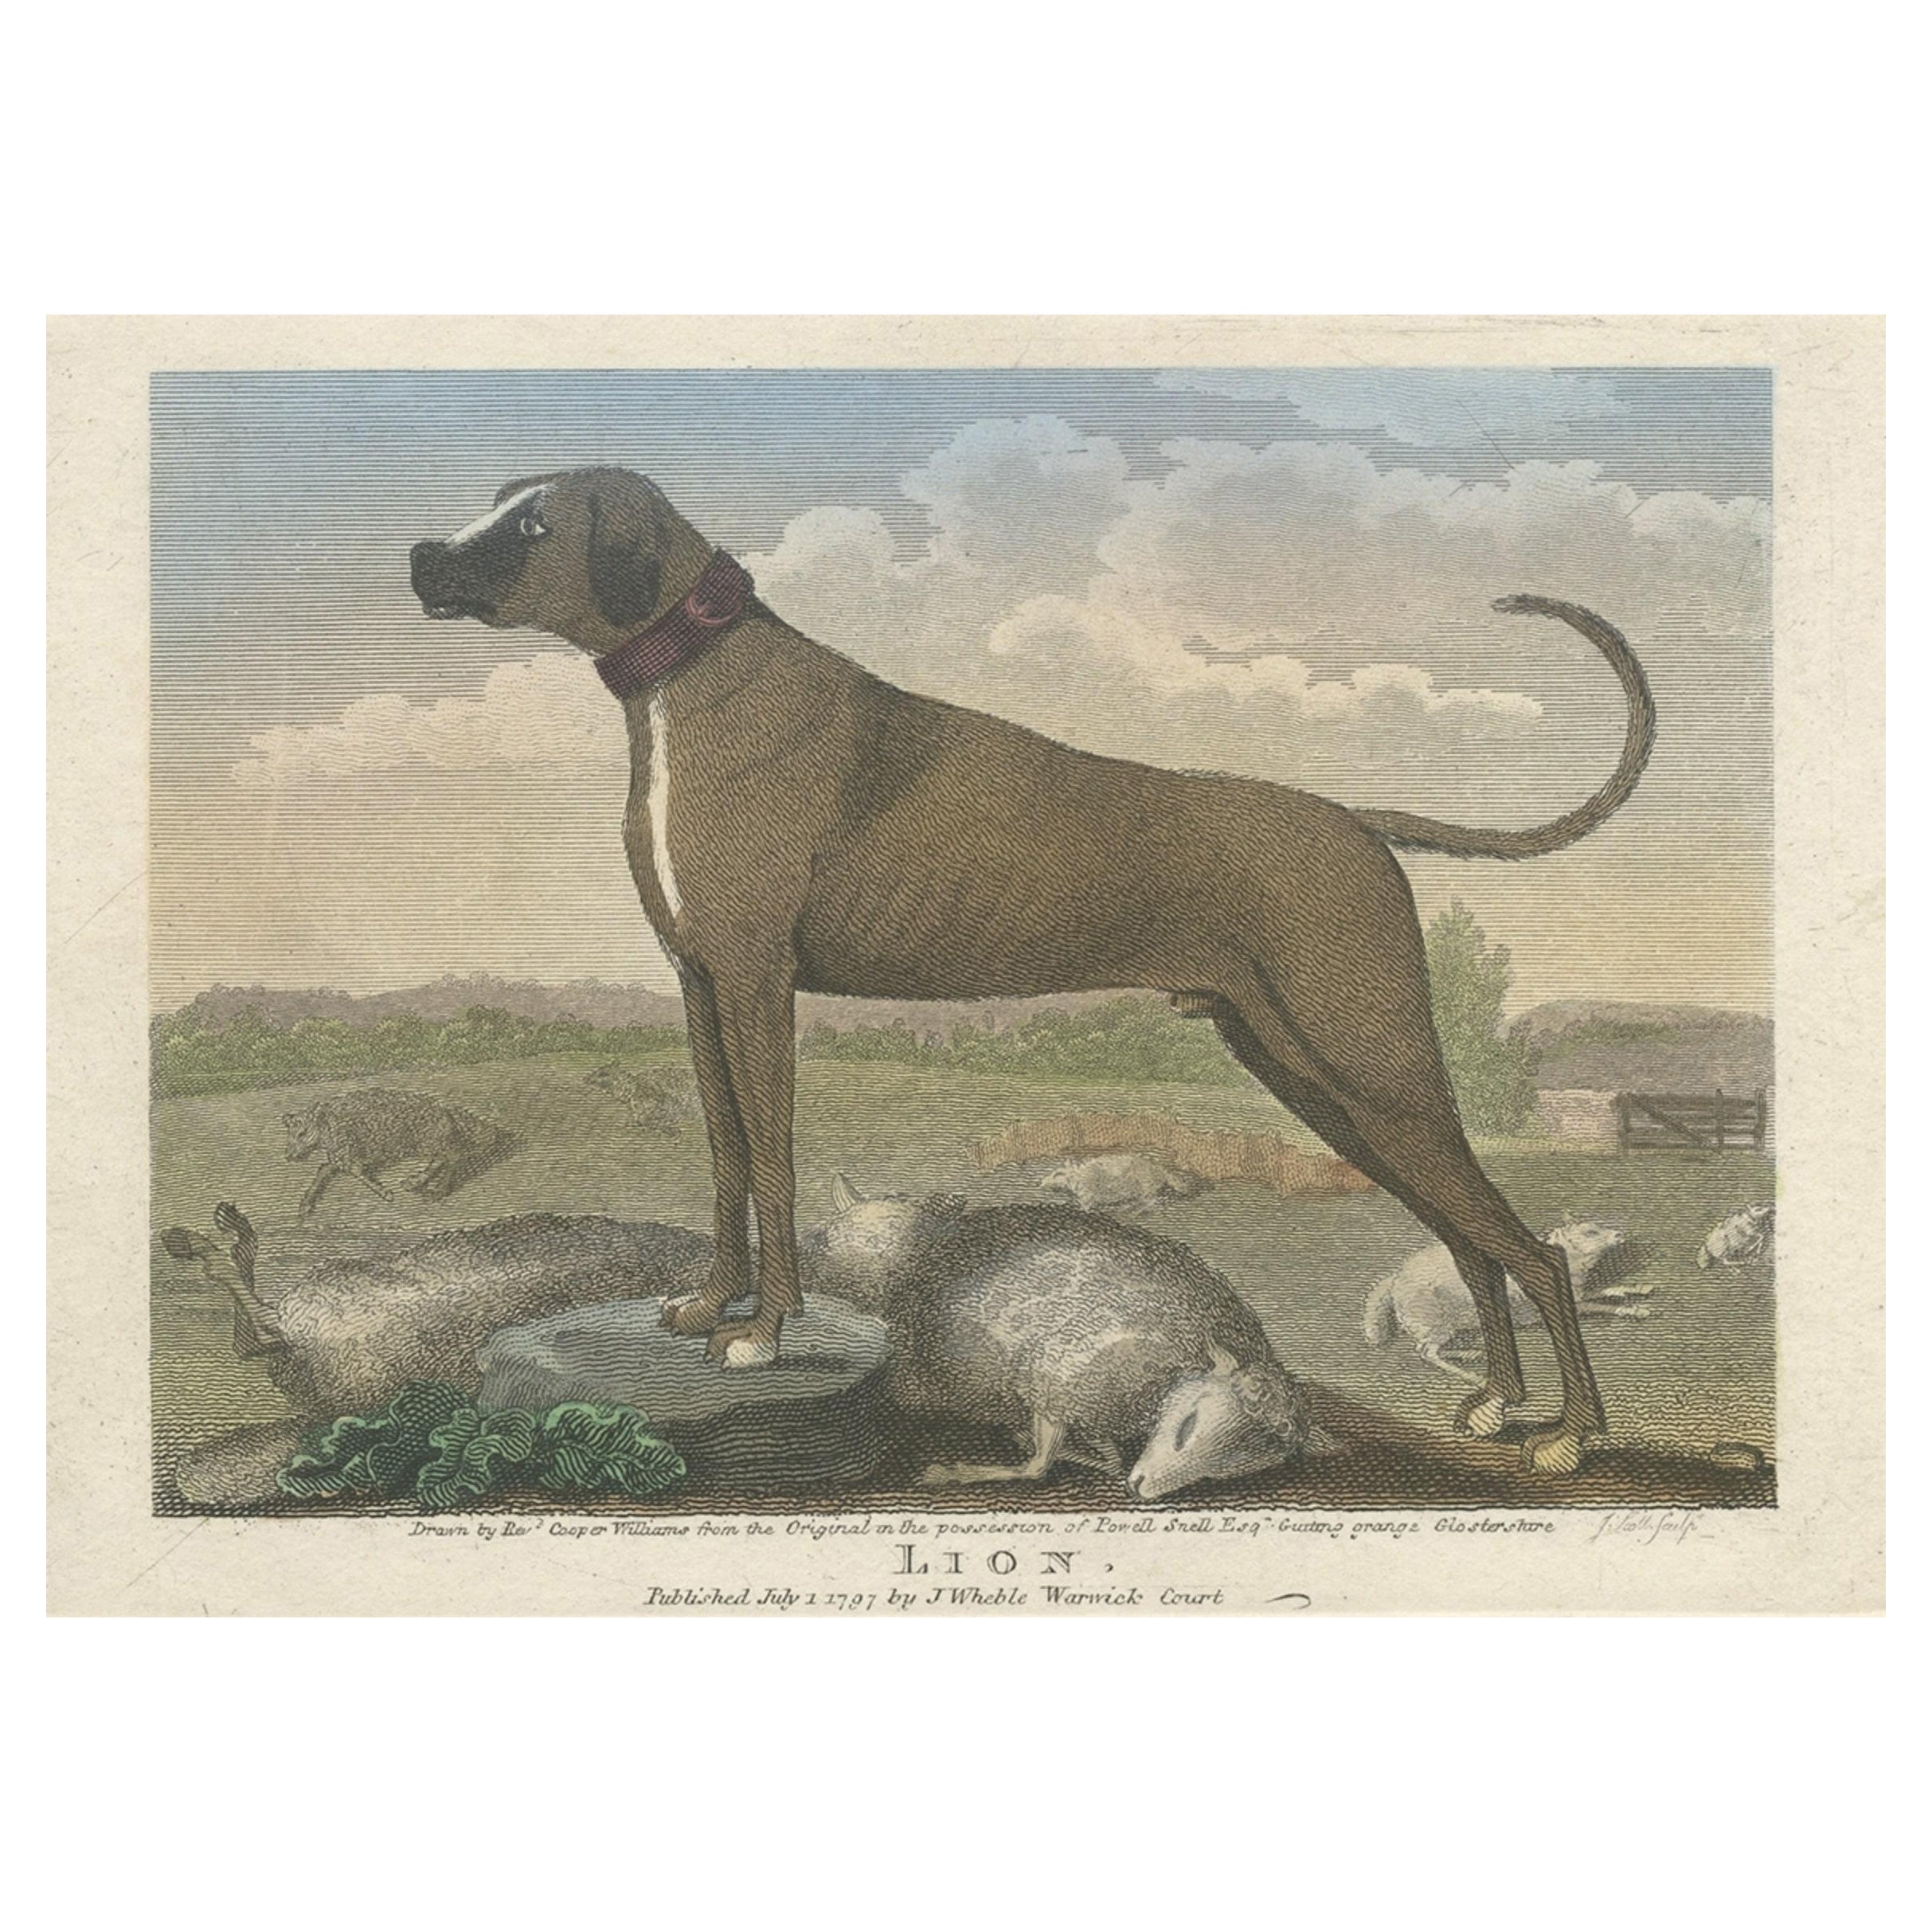 Antique Hand-Colored Print of a Dog Named 'Lion' and Some Dead Sheep, 1797